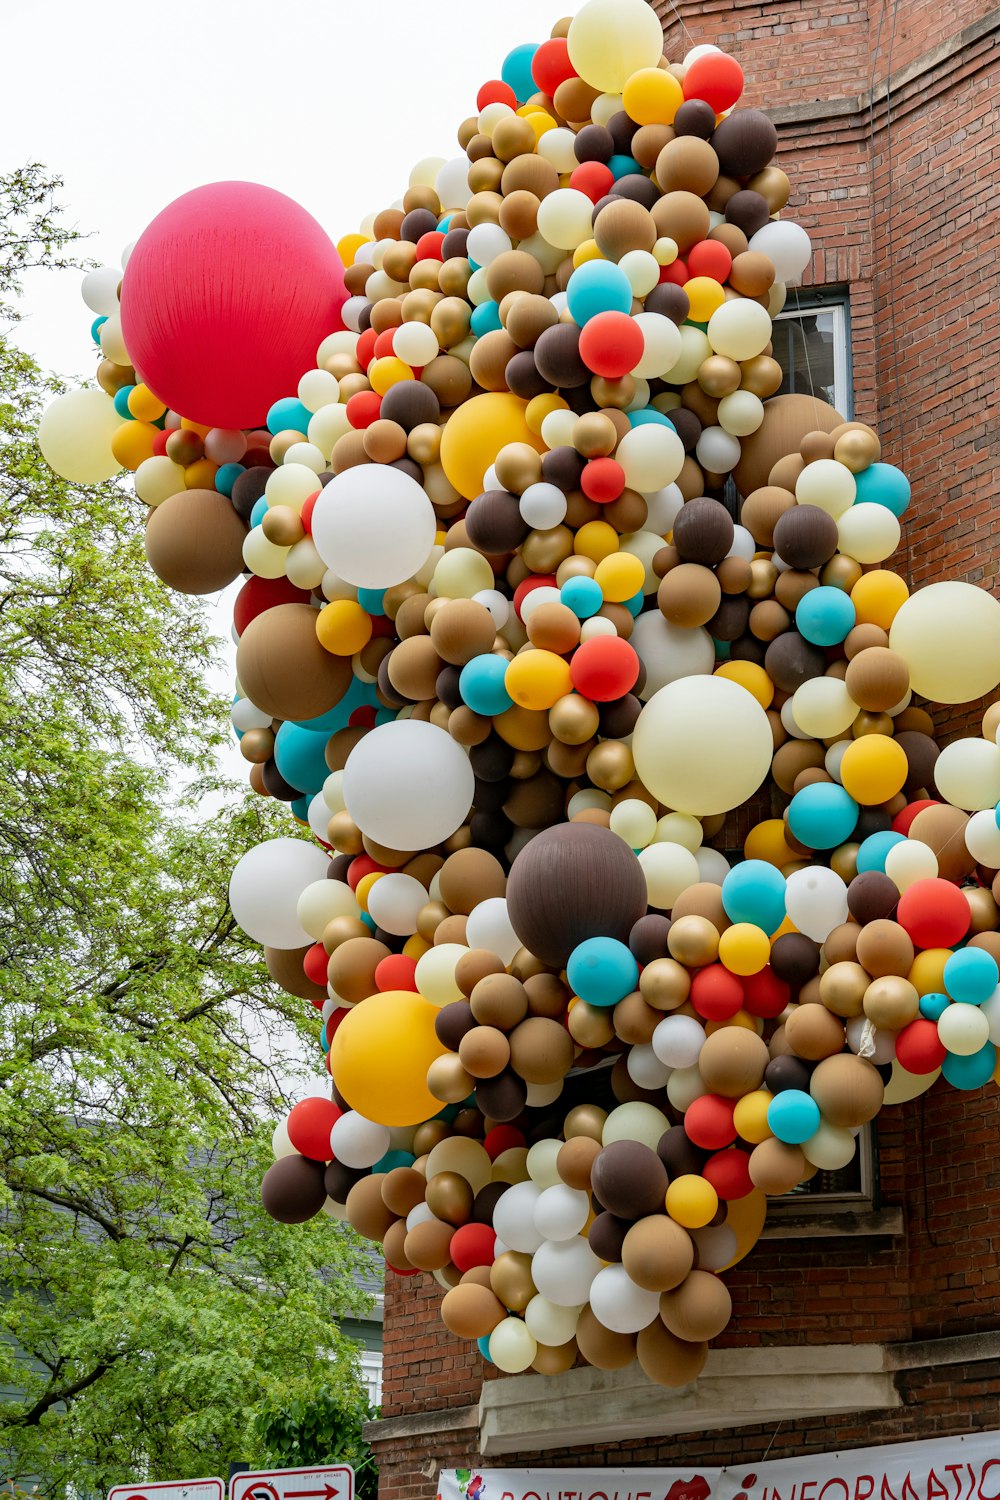 balloon lot in brown building near tree during daytime